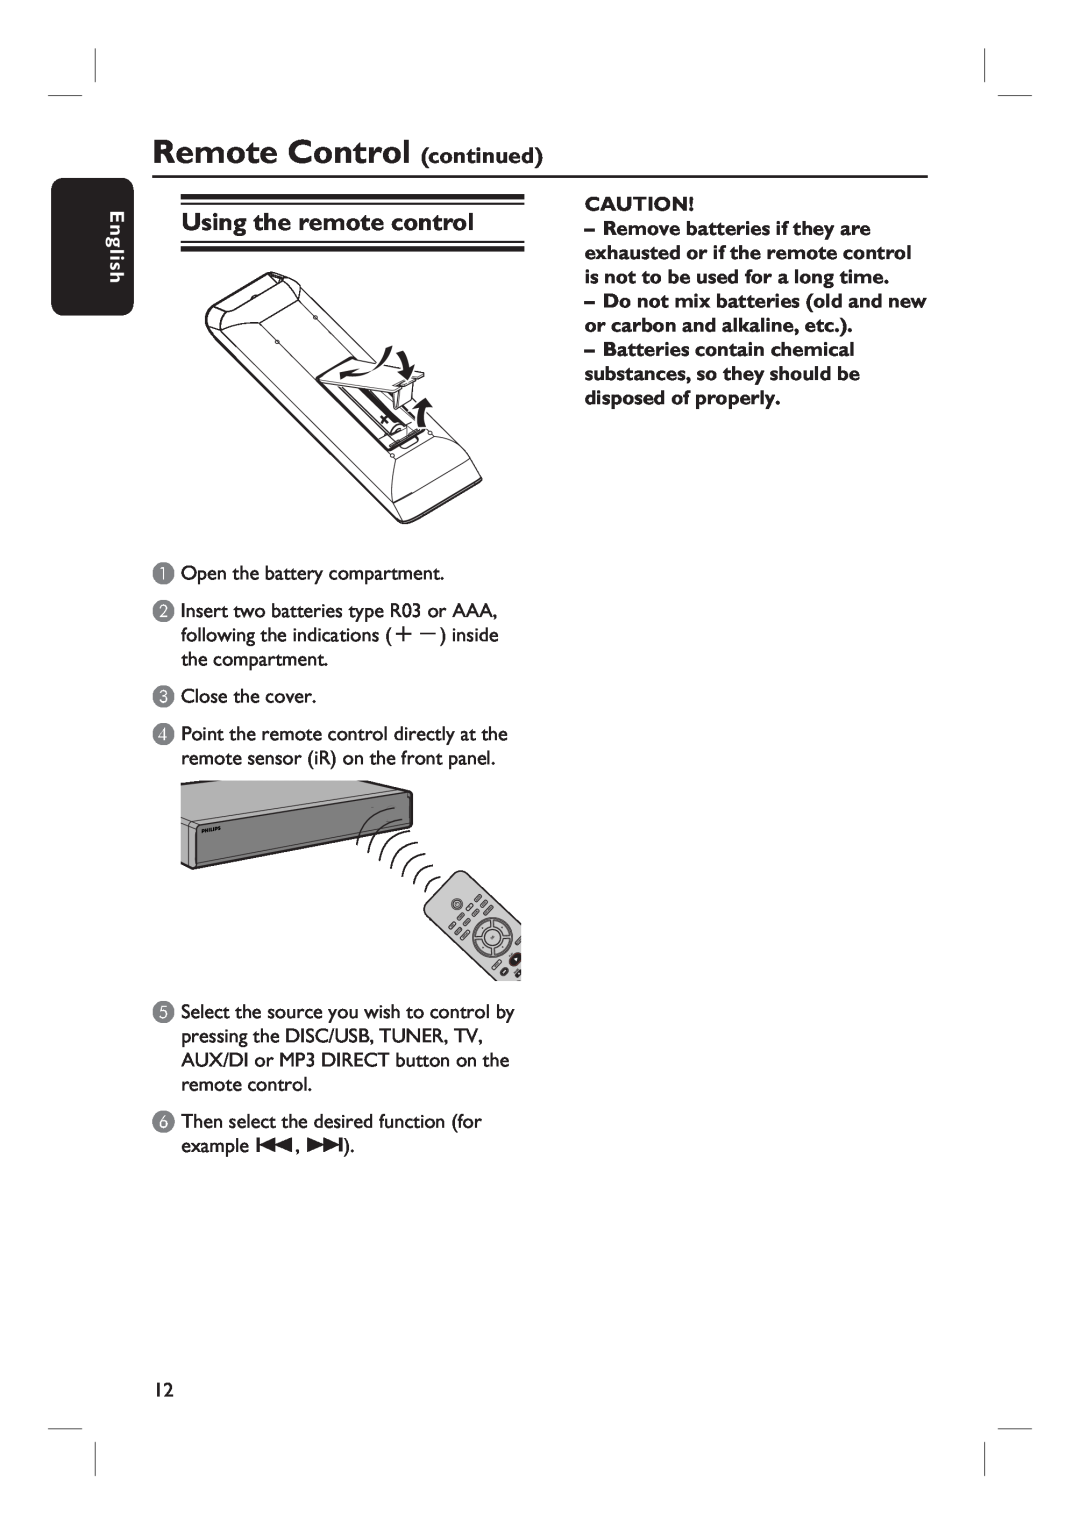 Philips HTS6510 user manual Using the remote control, Remote Control continued, English 